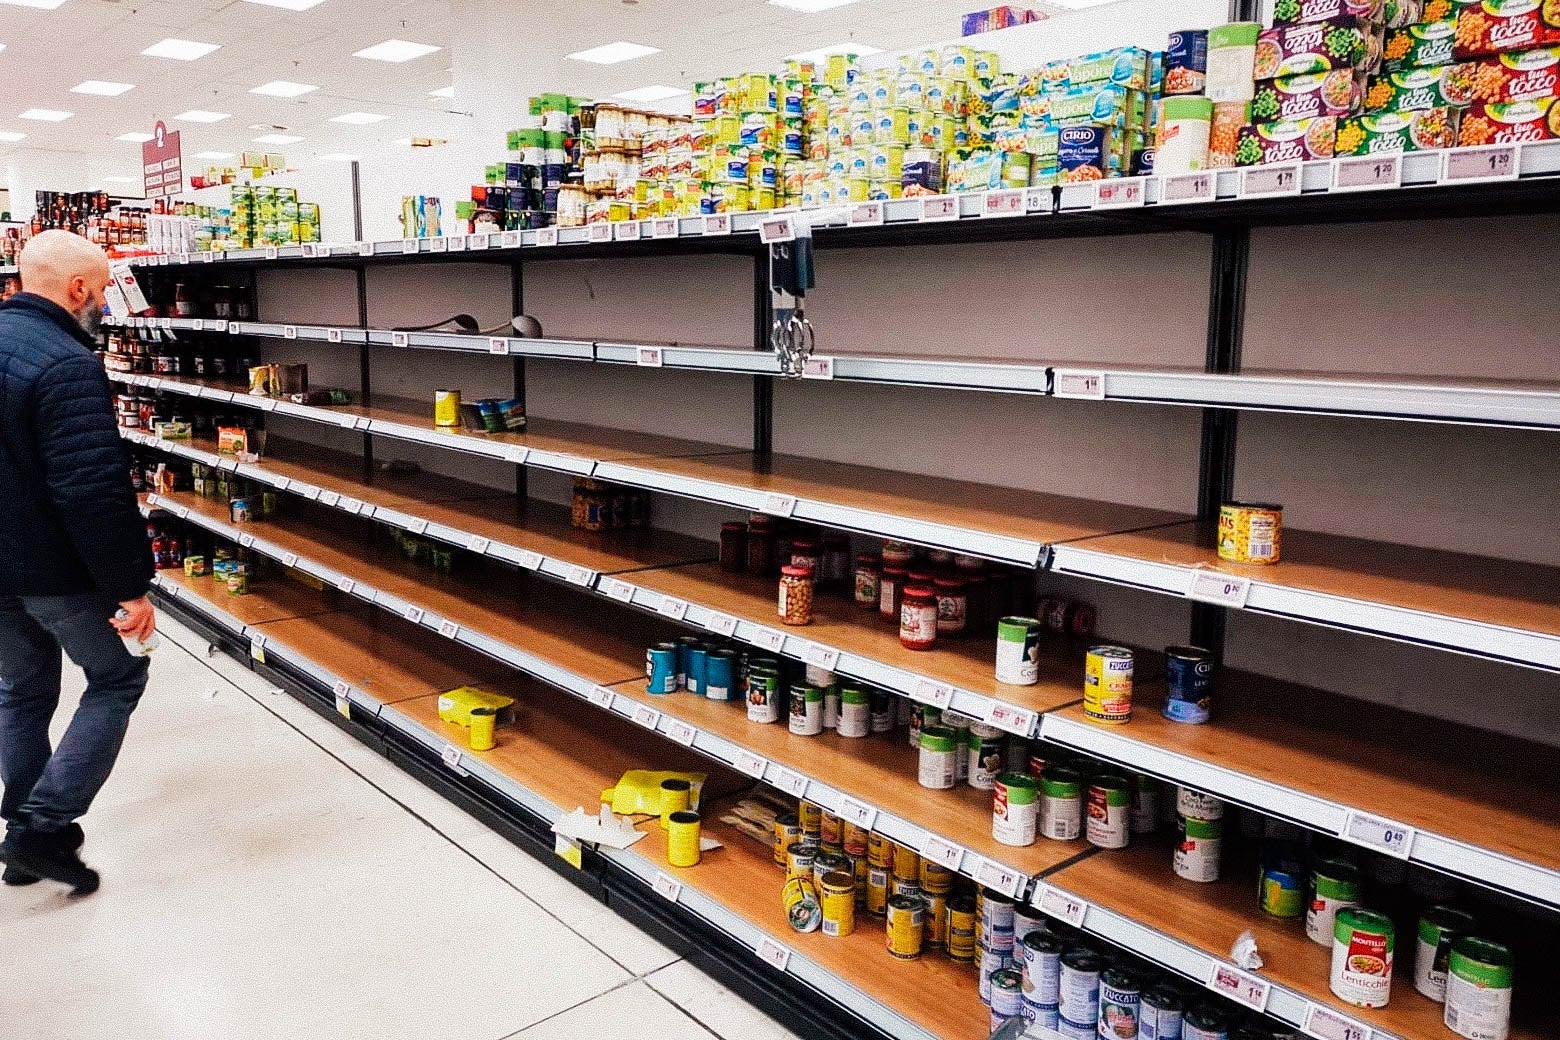 A man stares at an empty canned goods aisle in the grocery store, with just a few choices left.